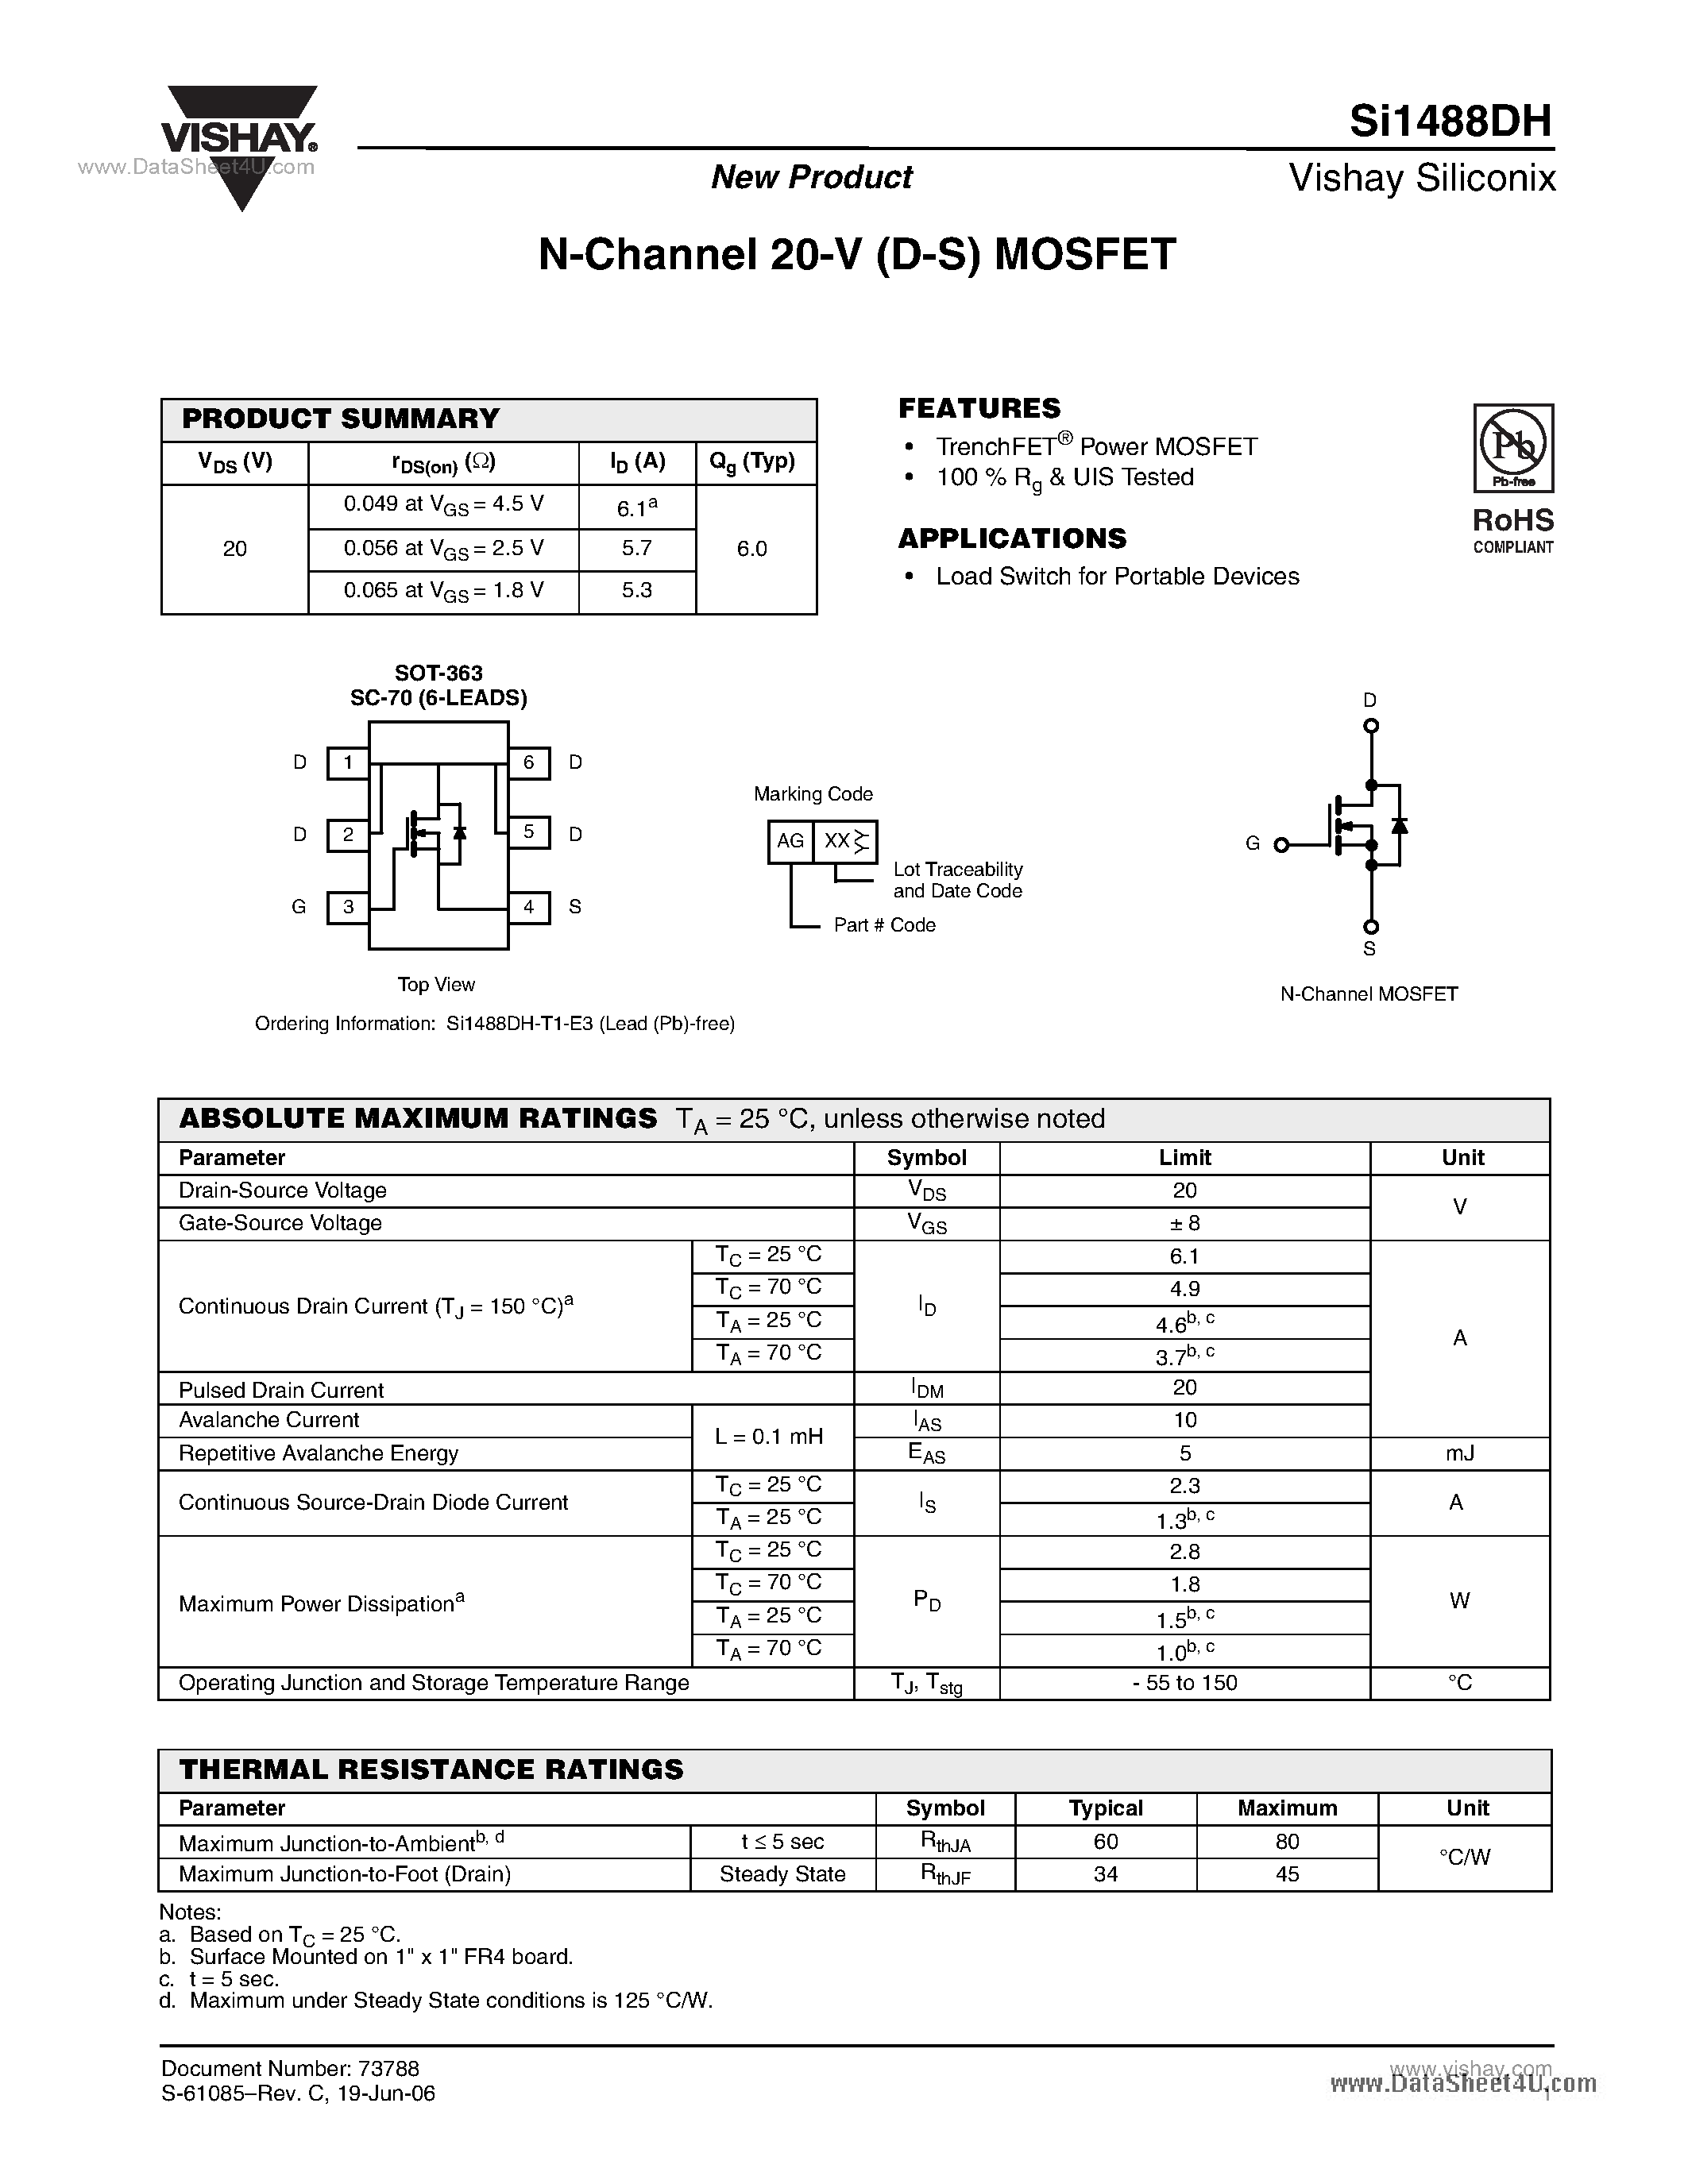 Datasheet SI1488DH - N-Channel 20-V (D-S) MOSFET page 1